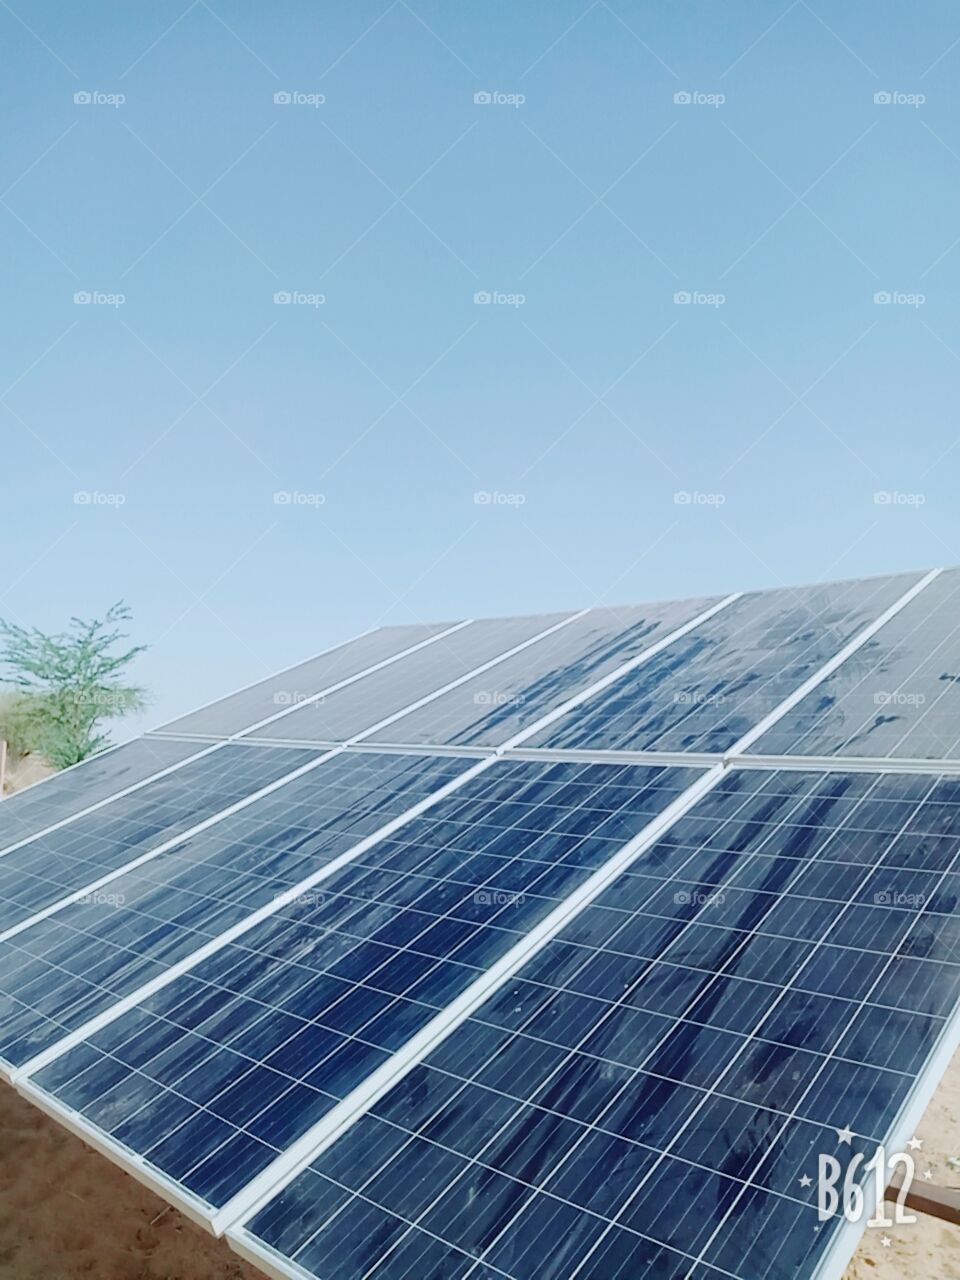 solar pannel at Rajasthan.its very usefull for power supply.